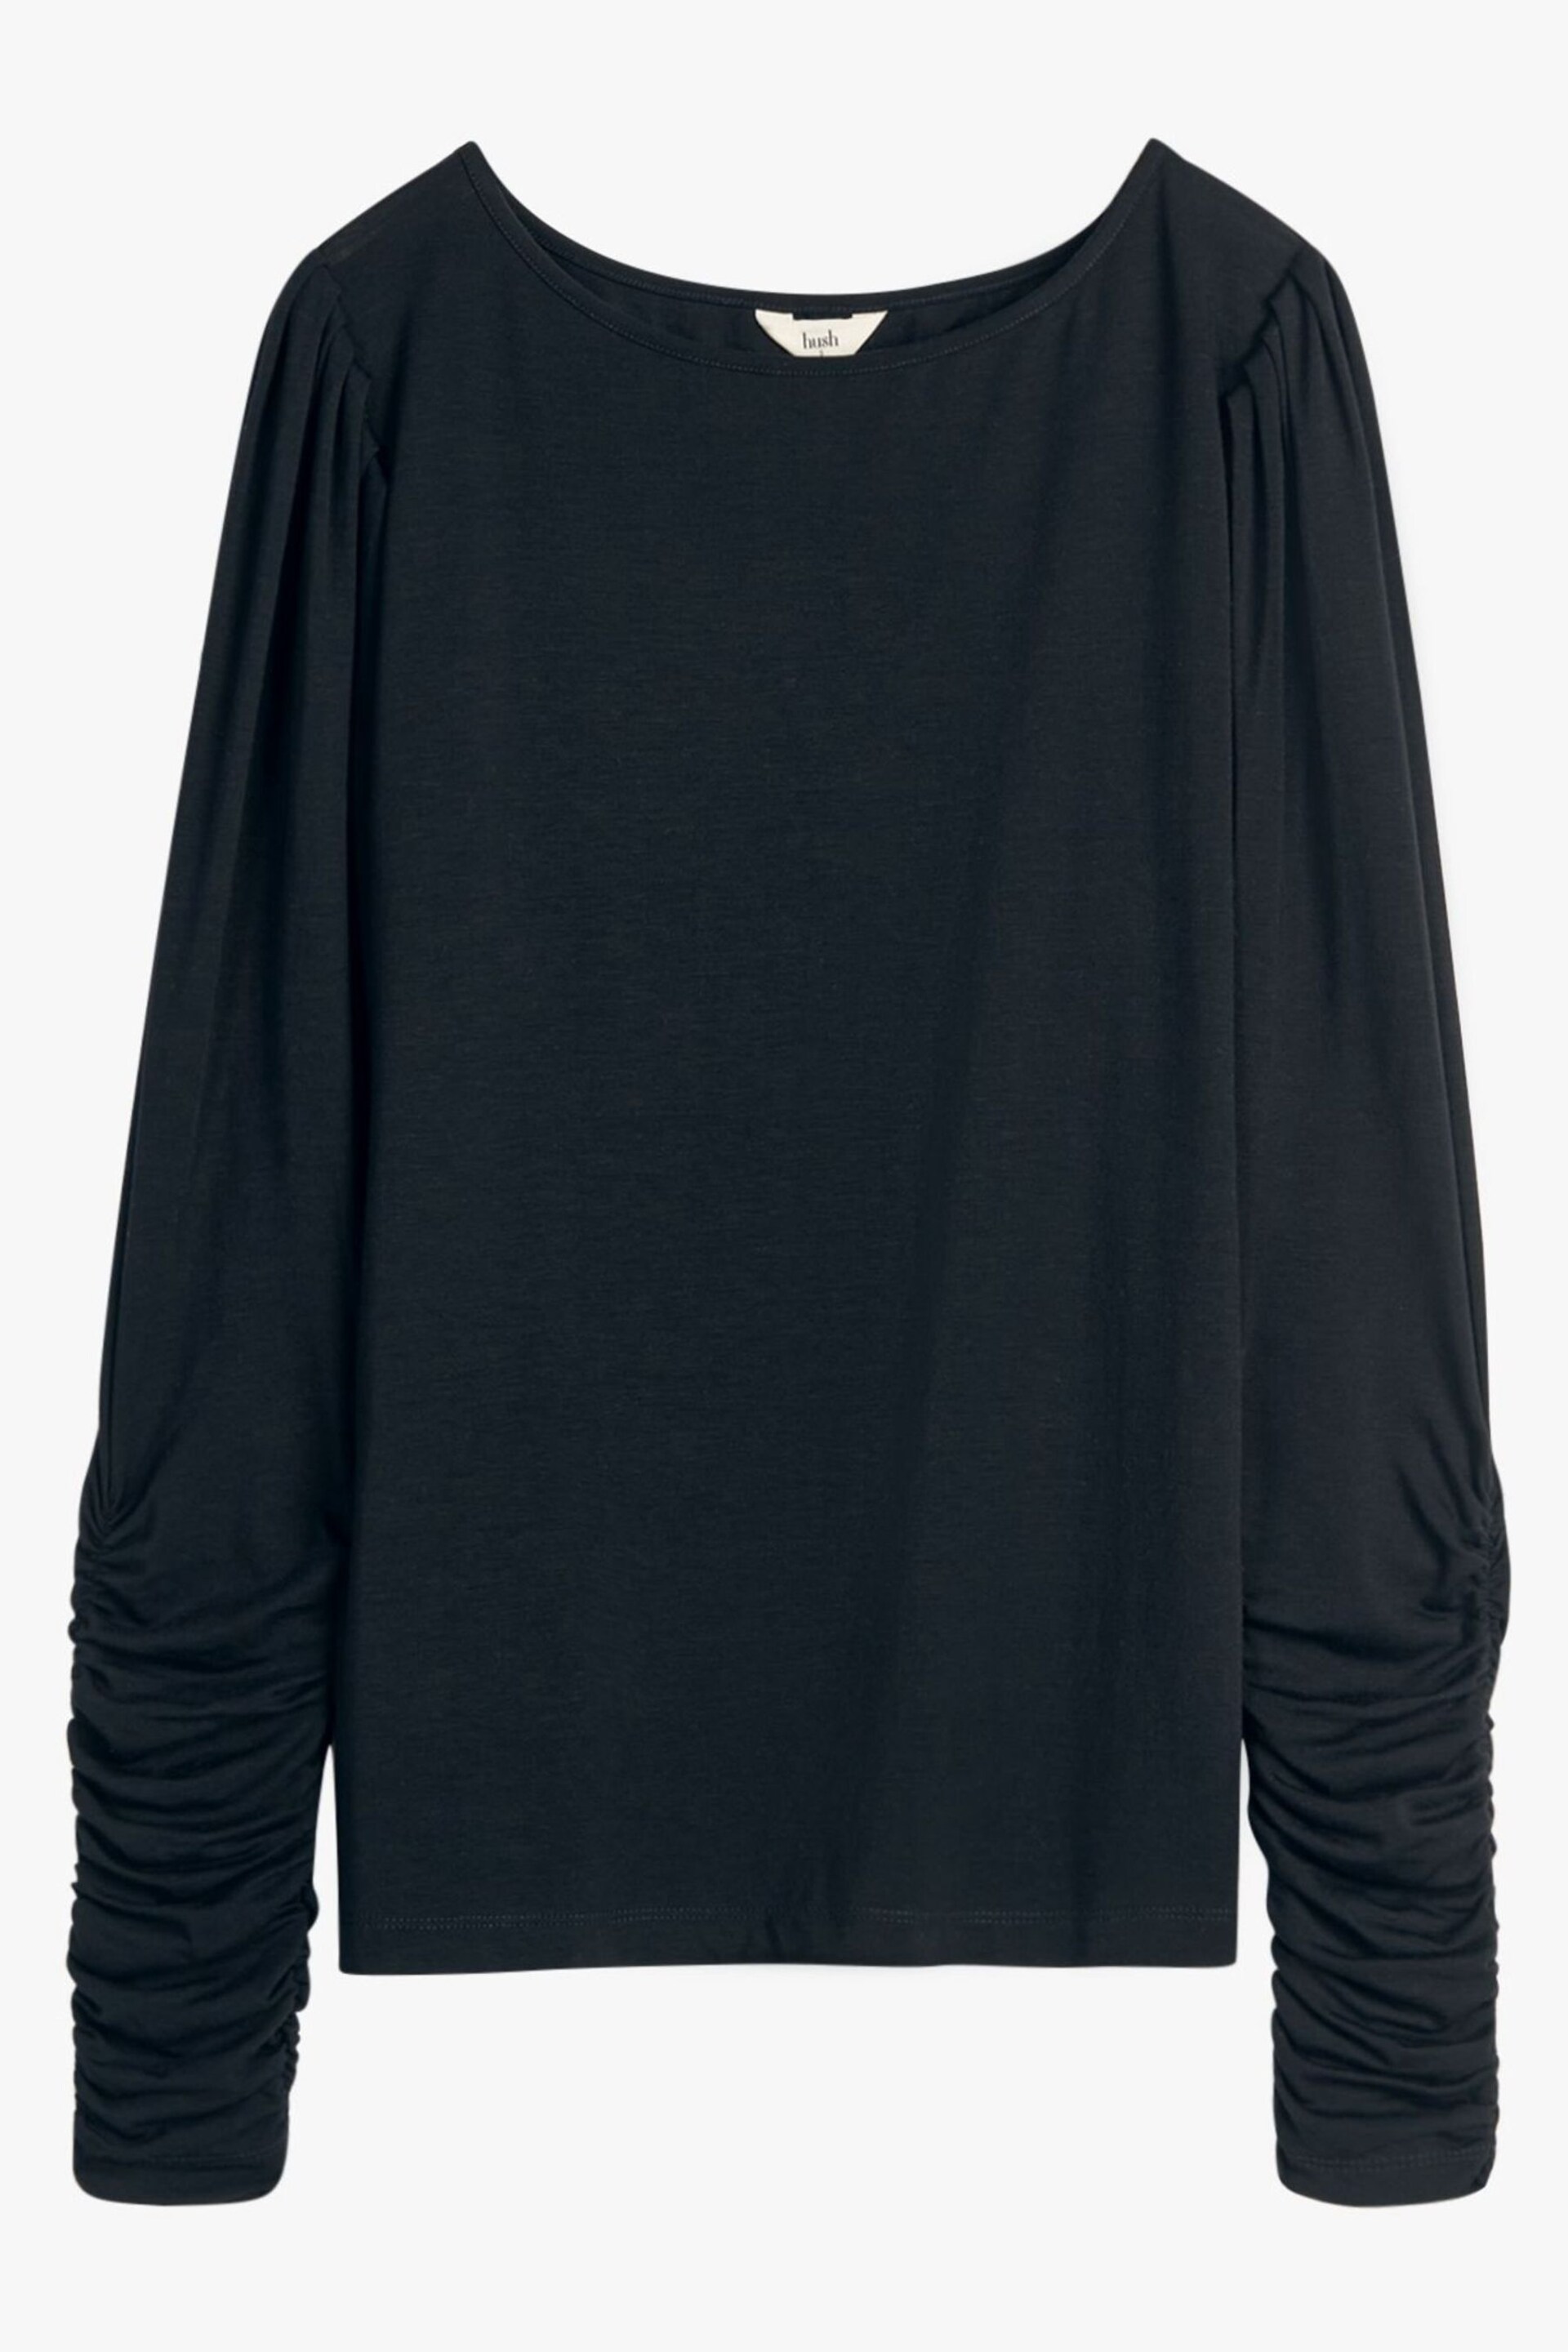 Hush Black Charlotte Ruched Sleeve Jersey Top - Image 5 of 5